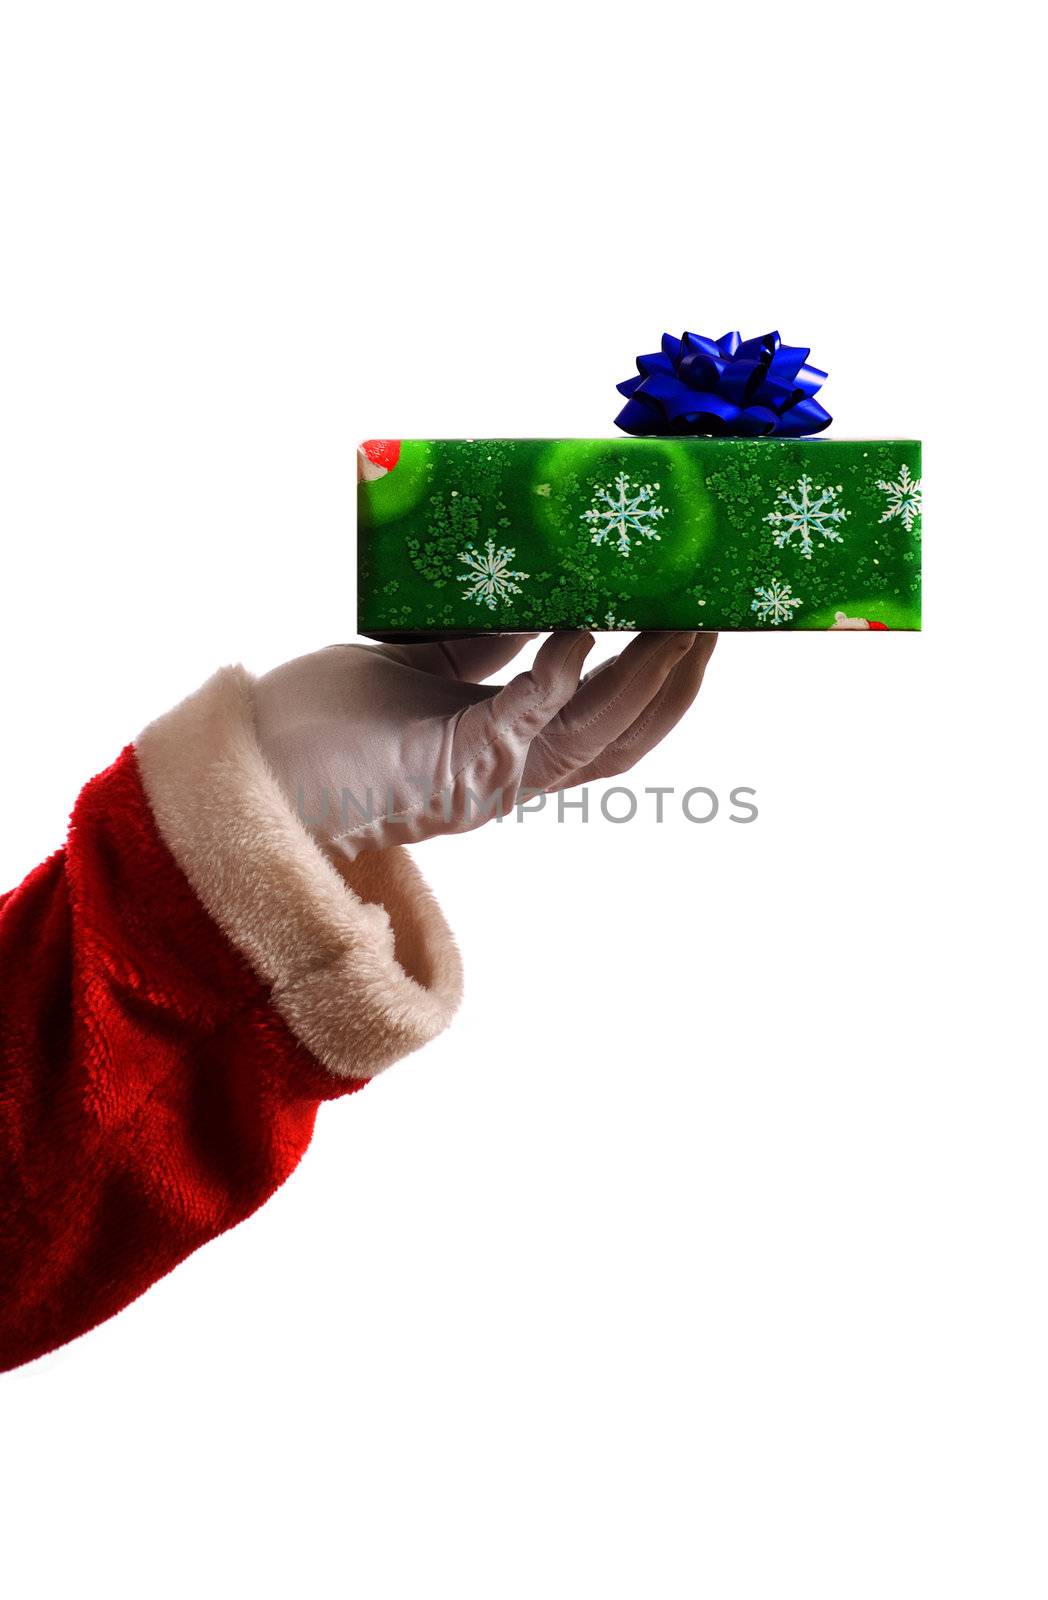 Santa Claus Father Christmas hand with wrapping paper present and blue star ribbon decoration